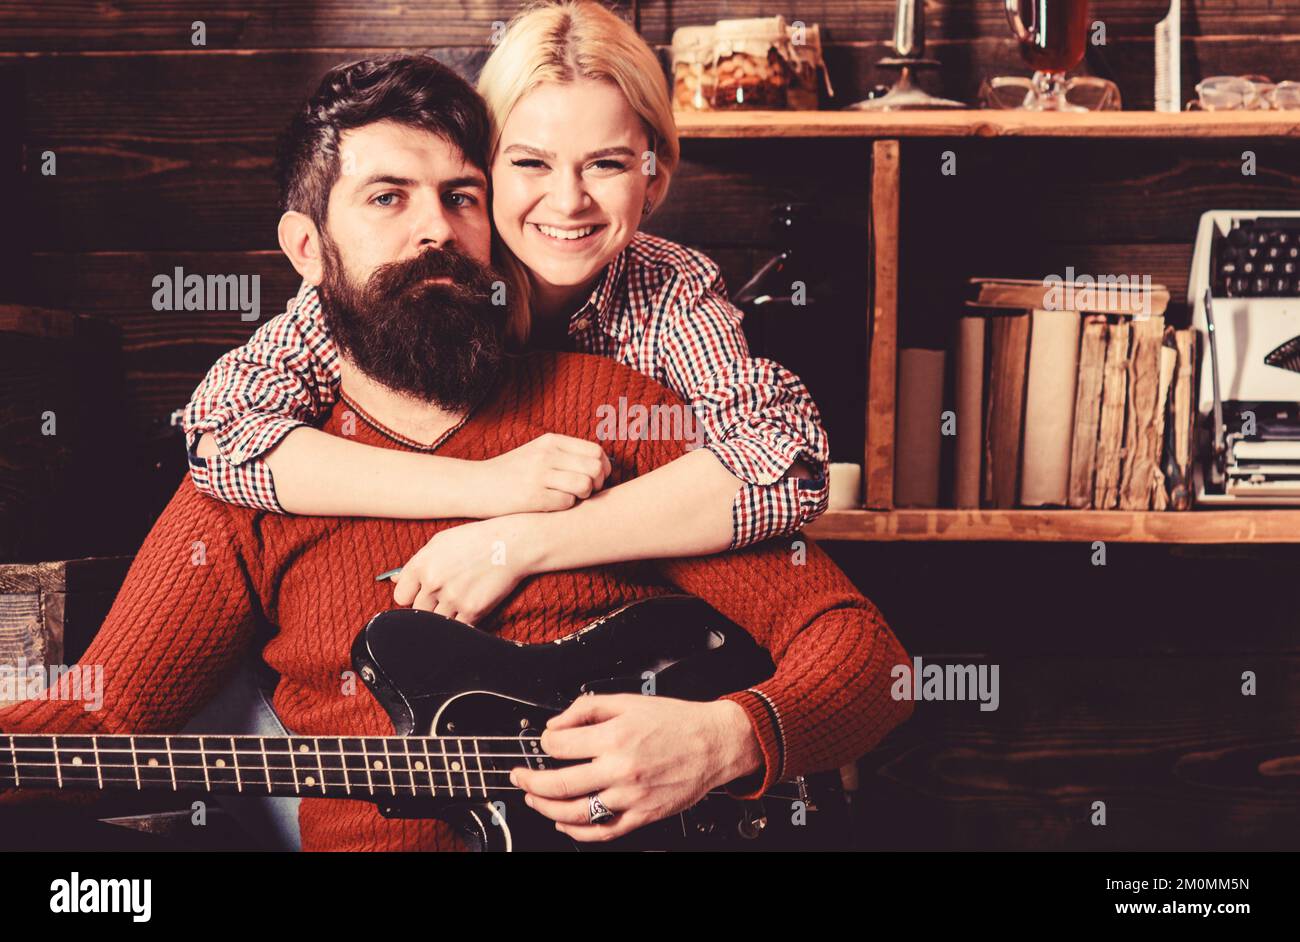 Romantic evening concept. Lady and man with beard on happy faces hugs and plays guitar. Couple in wooden vintage interior enjoy guitar music. Couple Stock Photo